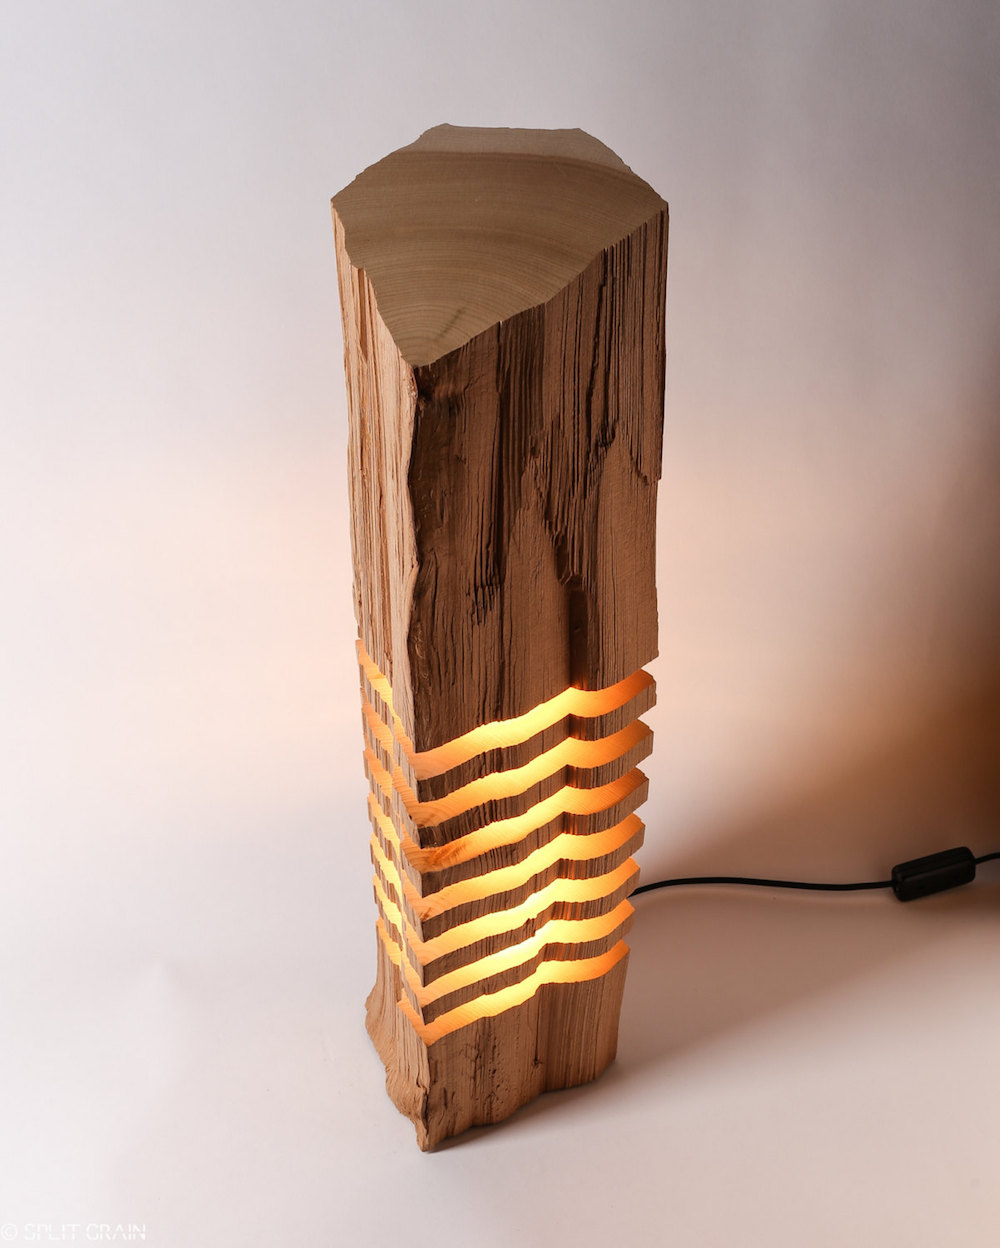 Every lamp is unique because there are no similar pieces of wood in nature